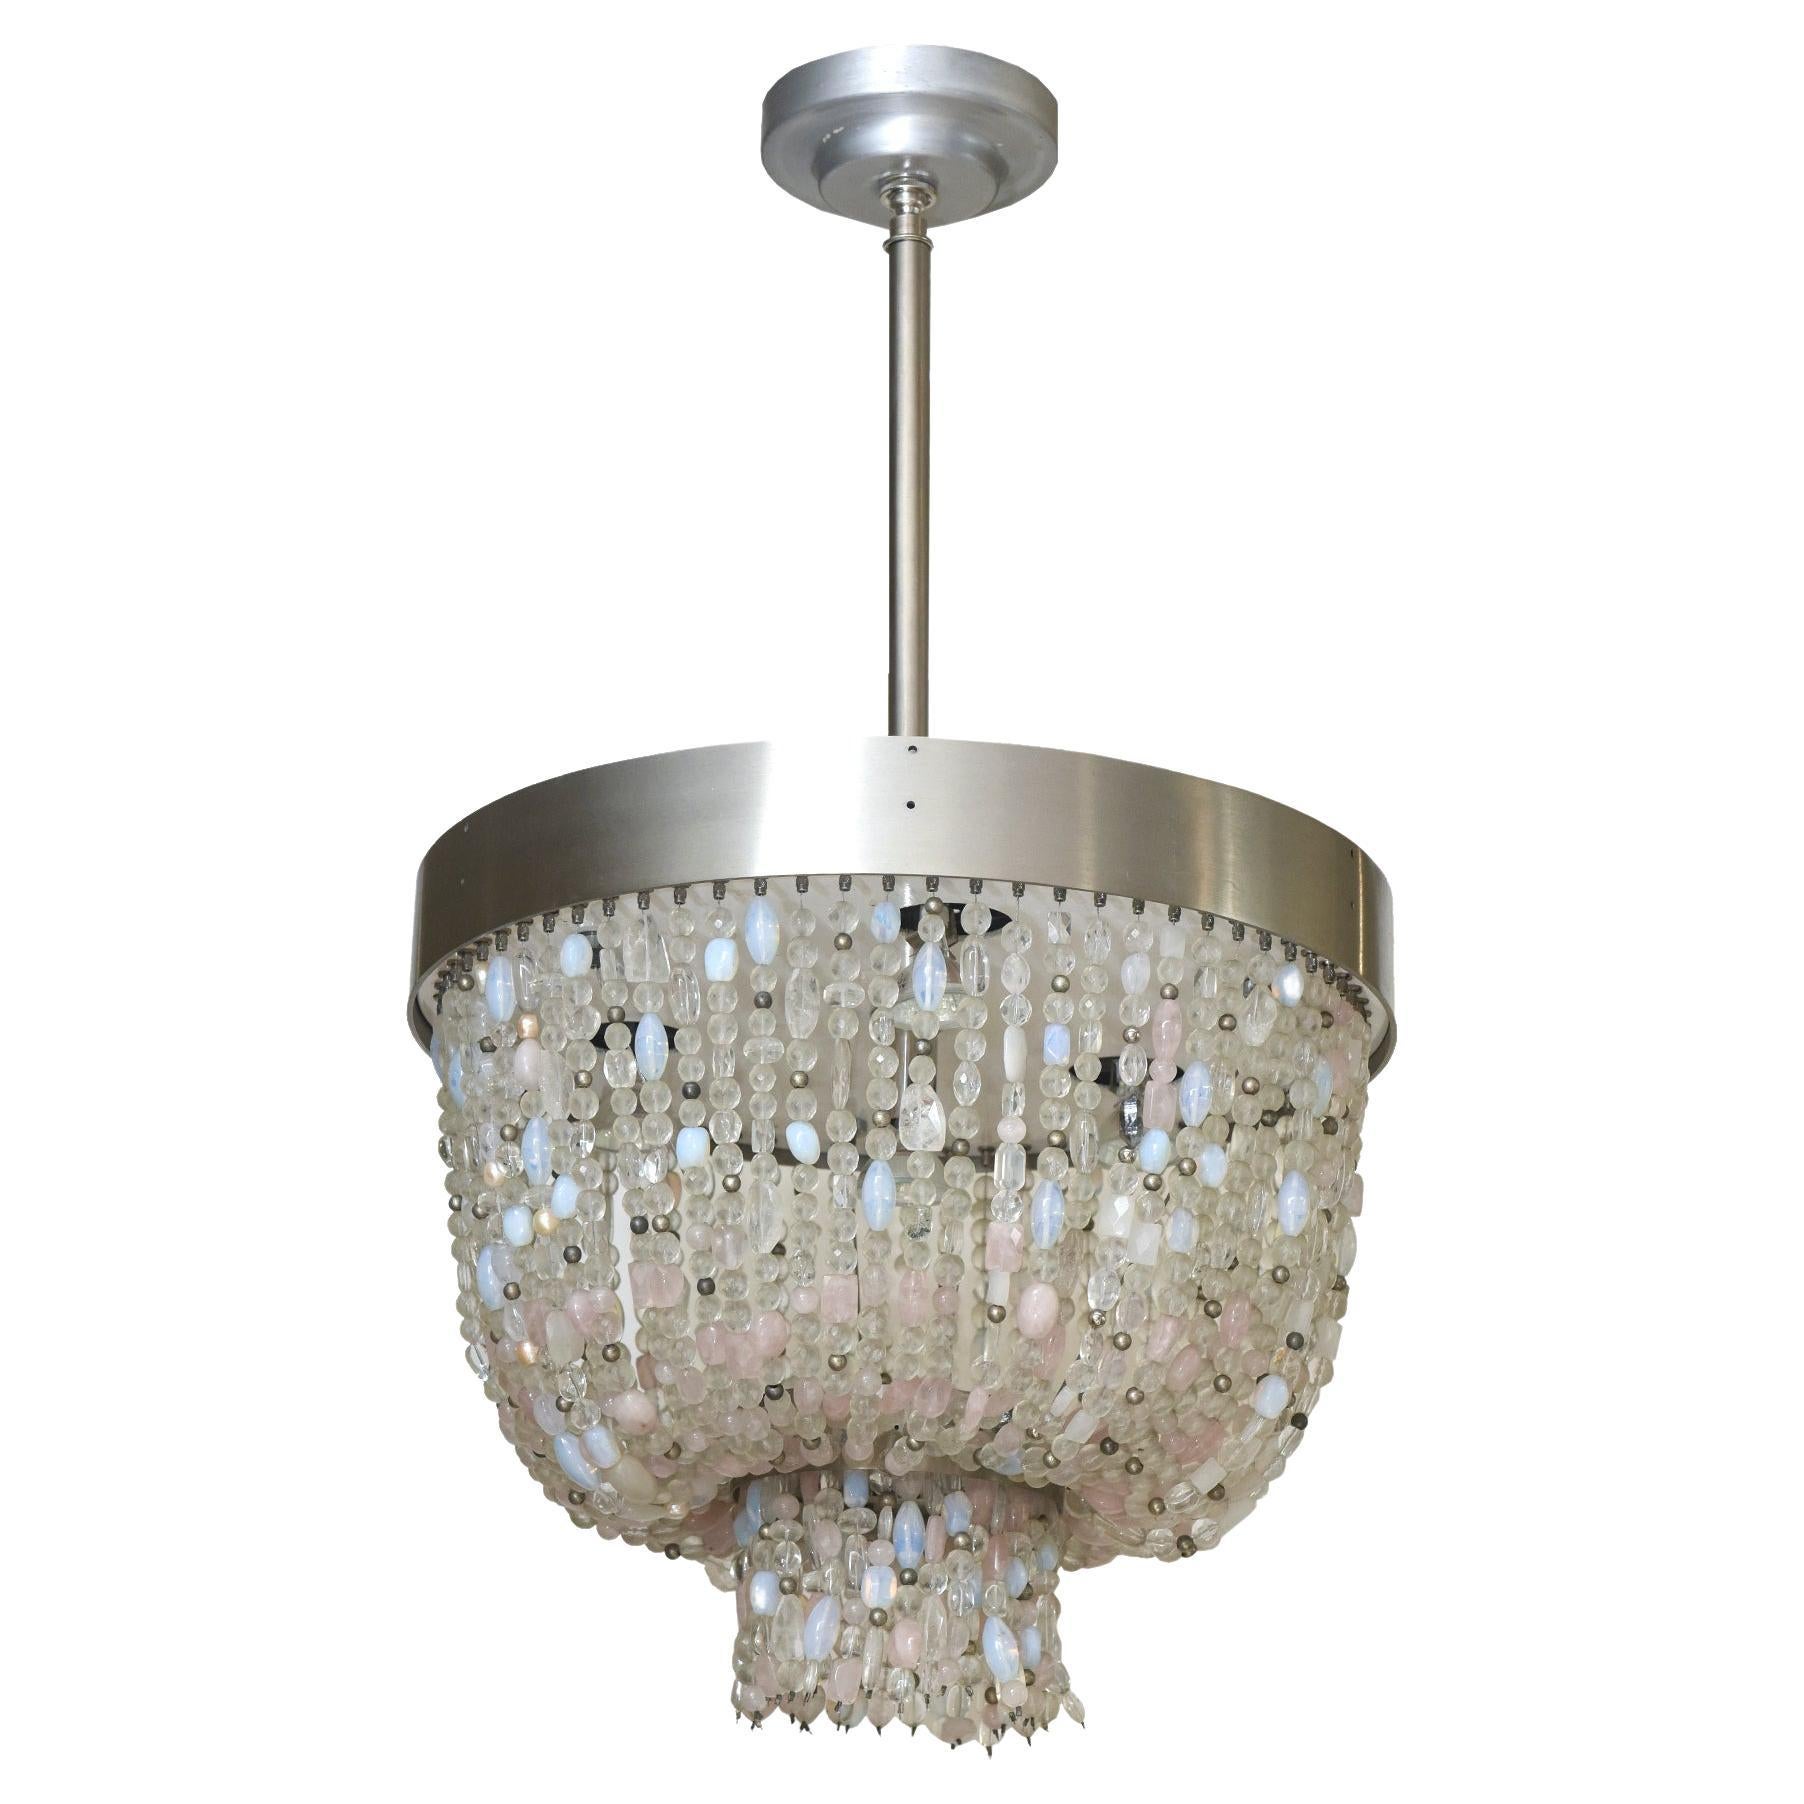  Quartz and Stainless Steel Two Tier Pink Lavaliere Chandelier by Thomas Fuchs For Sale